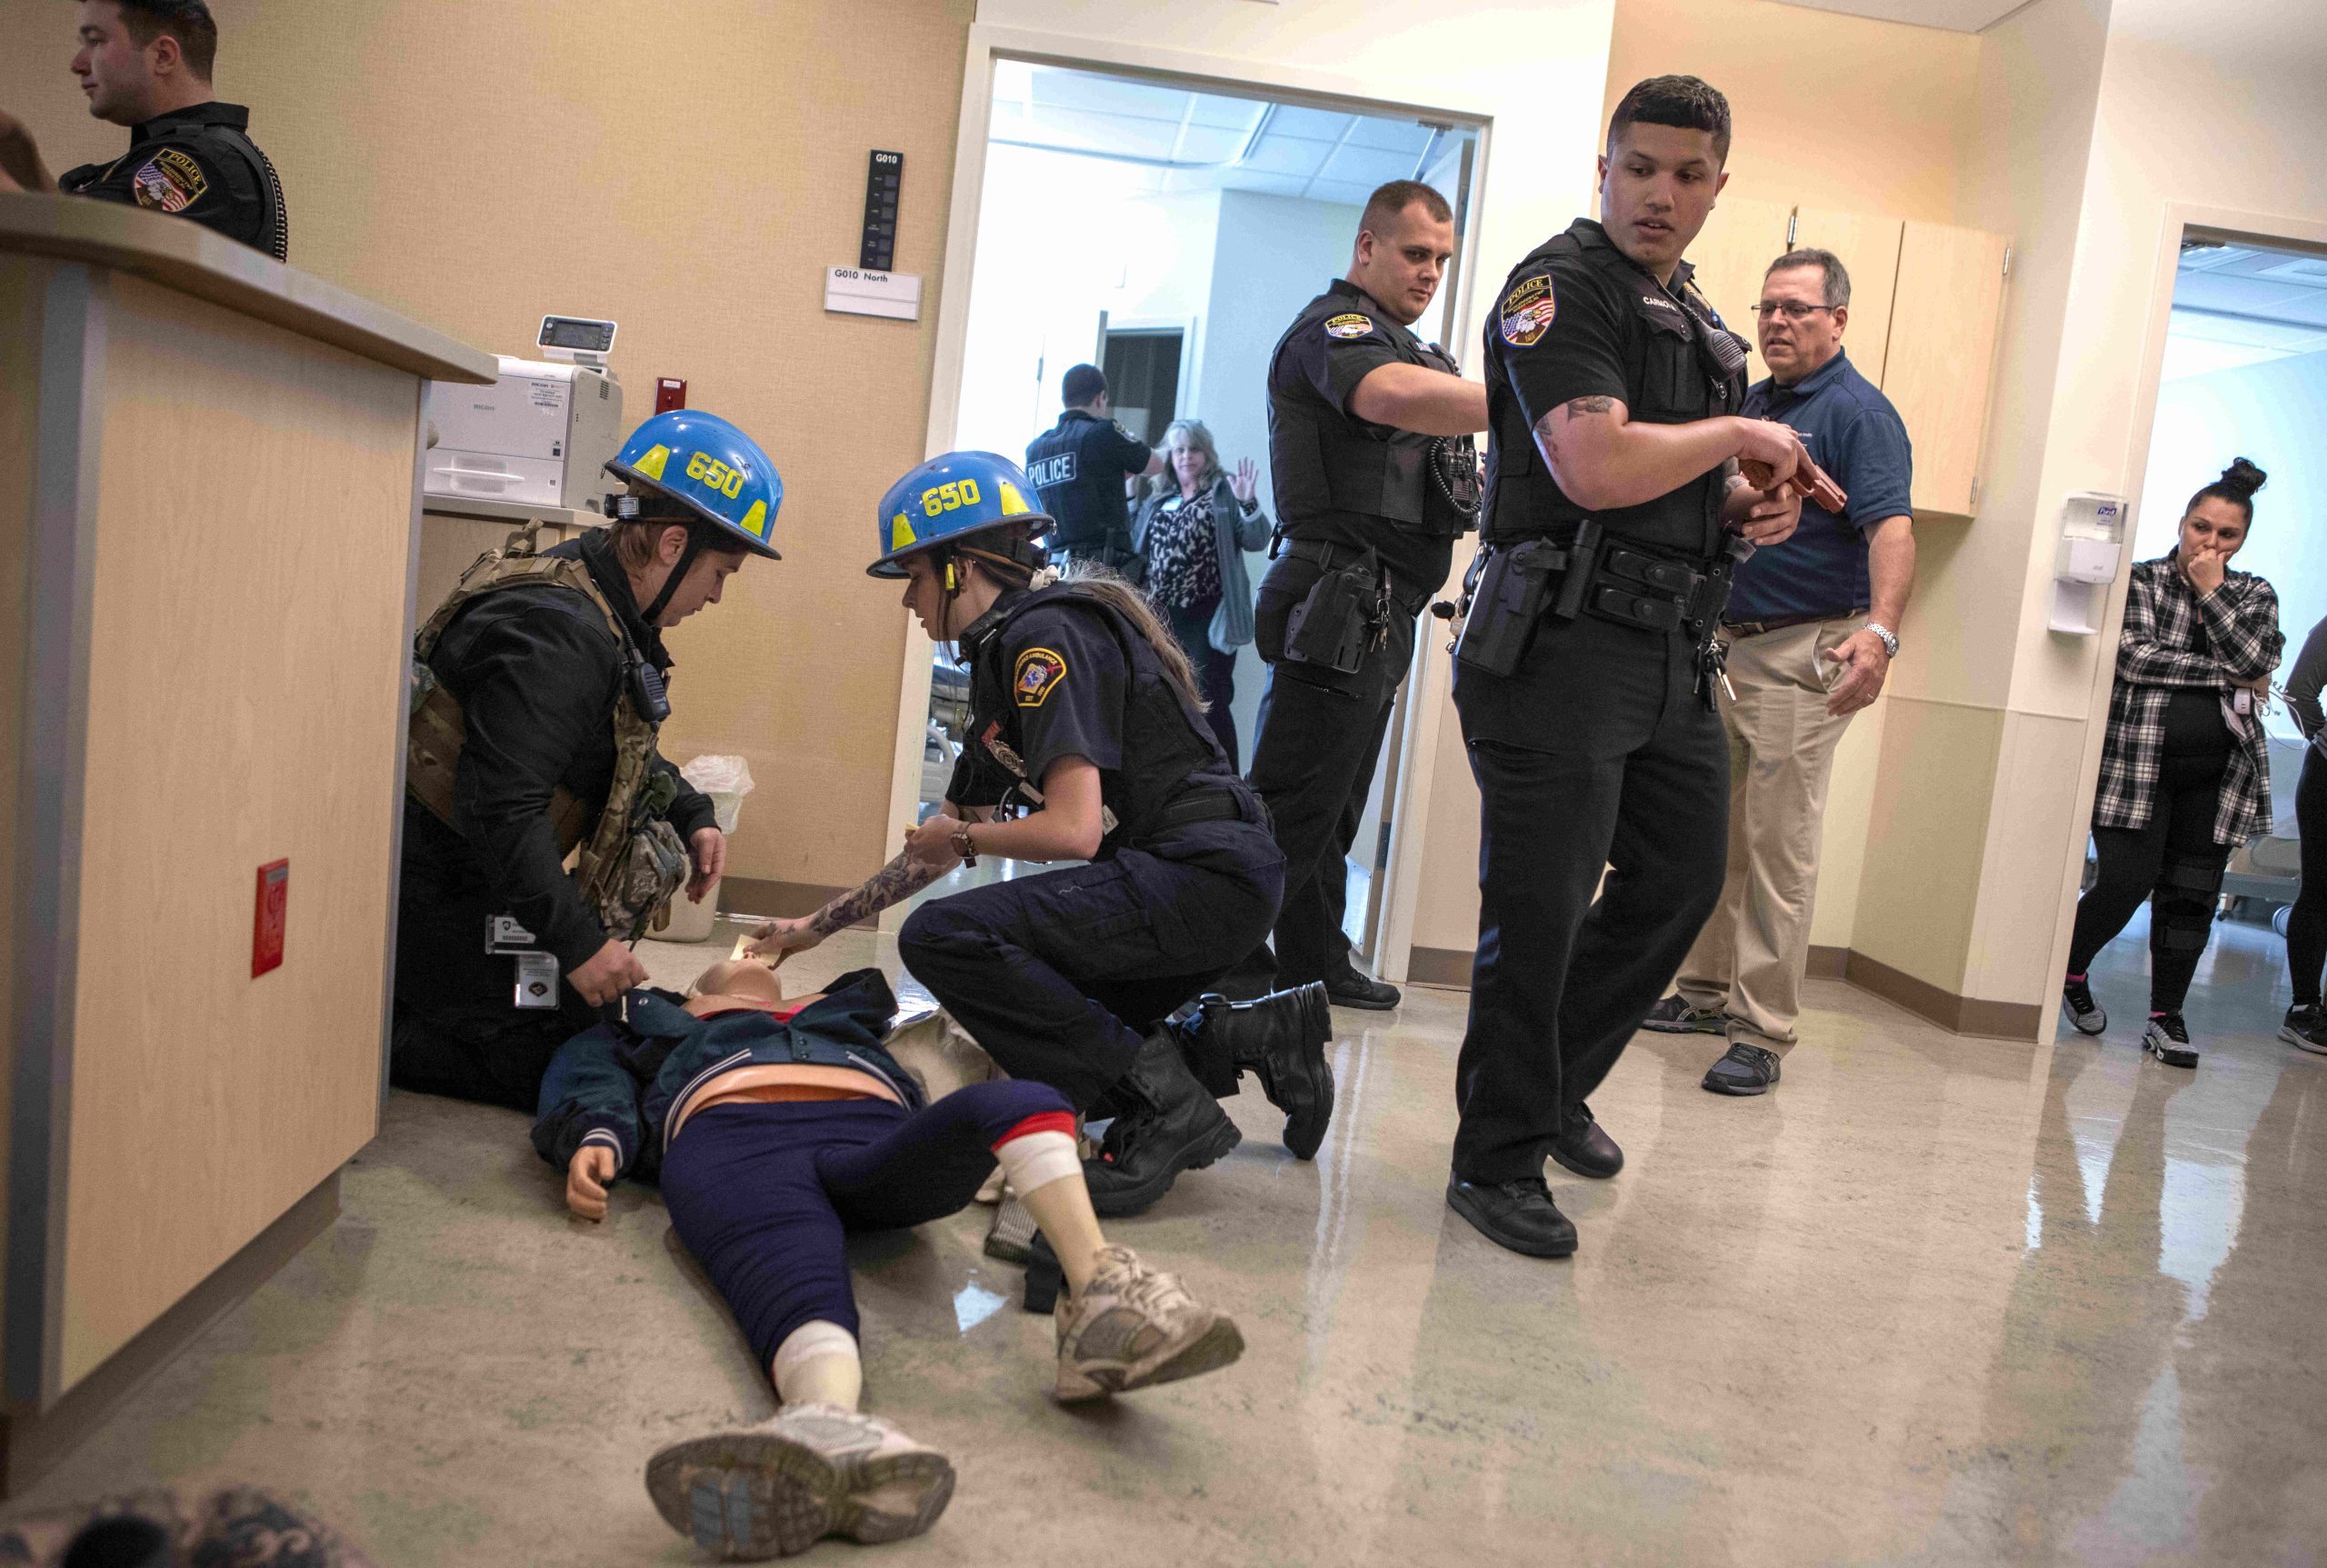 Two first responders attend to a mannequin – a simulated victim – while police officers and other drill participants look on.